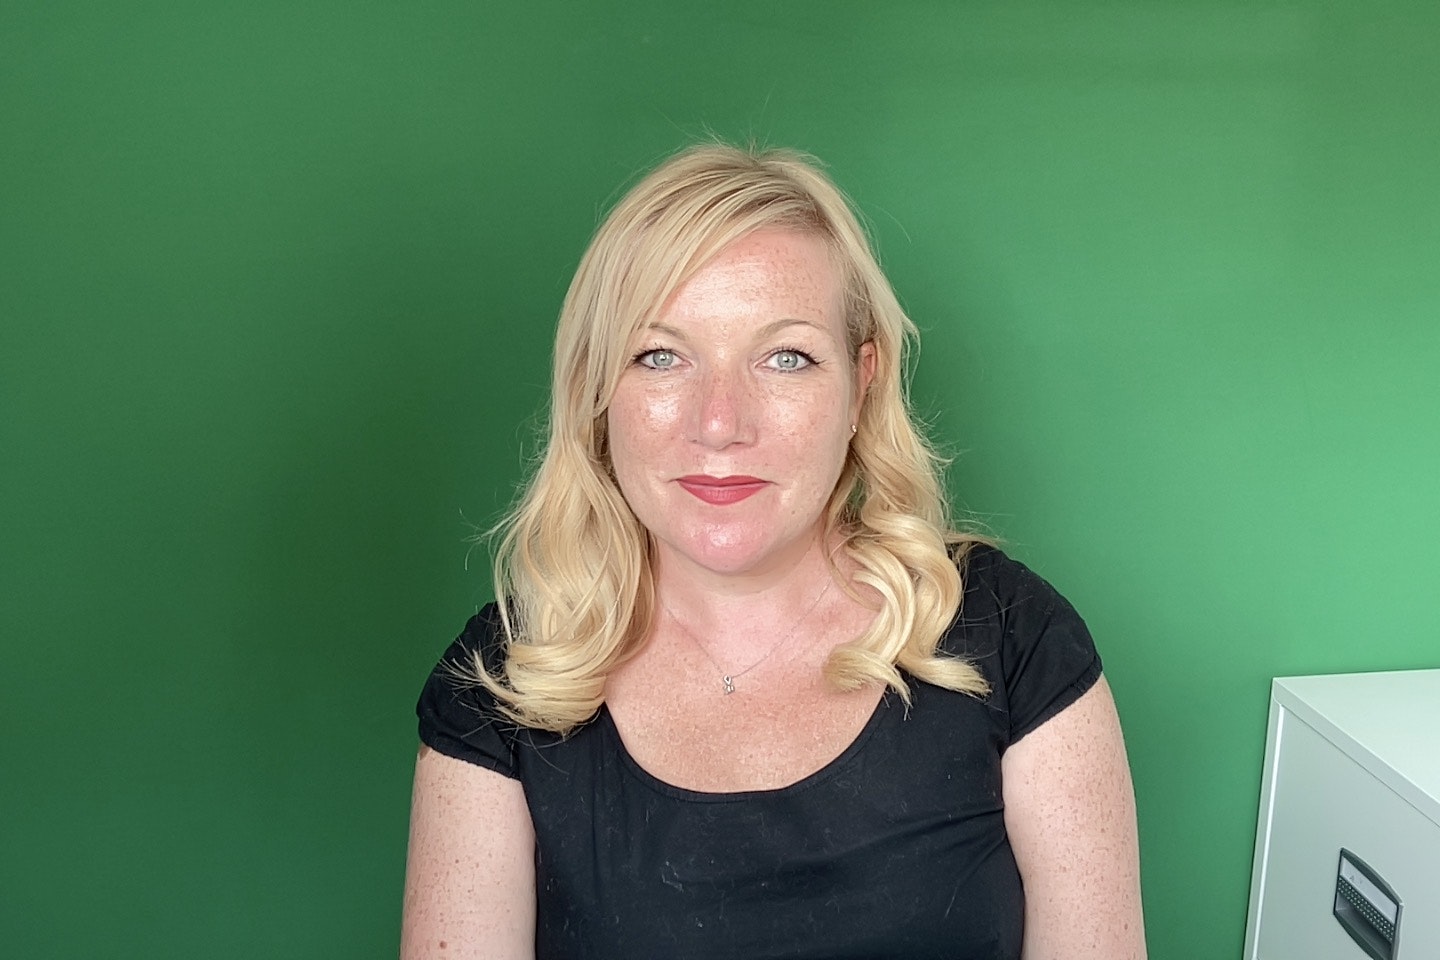 A photo of Kim-Adele Randall, an alternative business coach, in front of a green screen